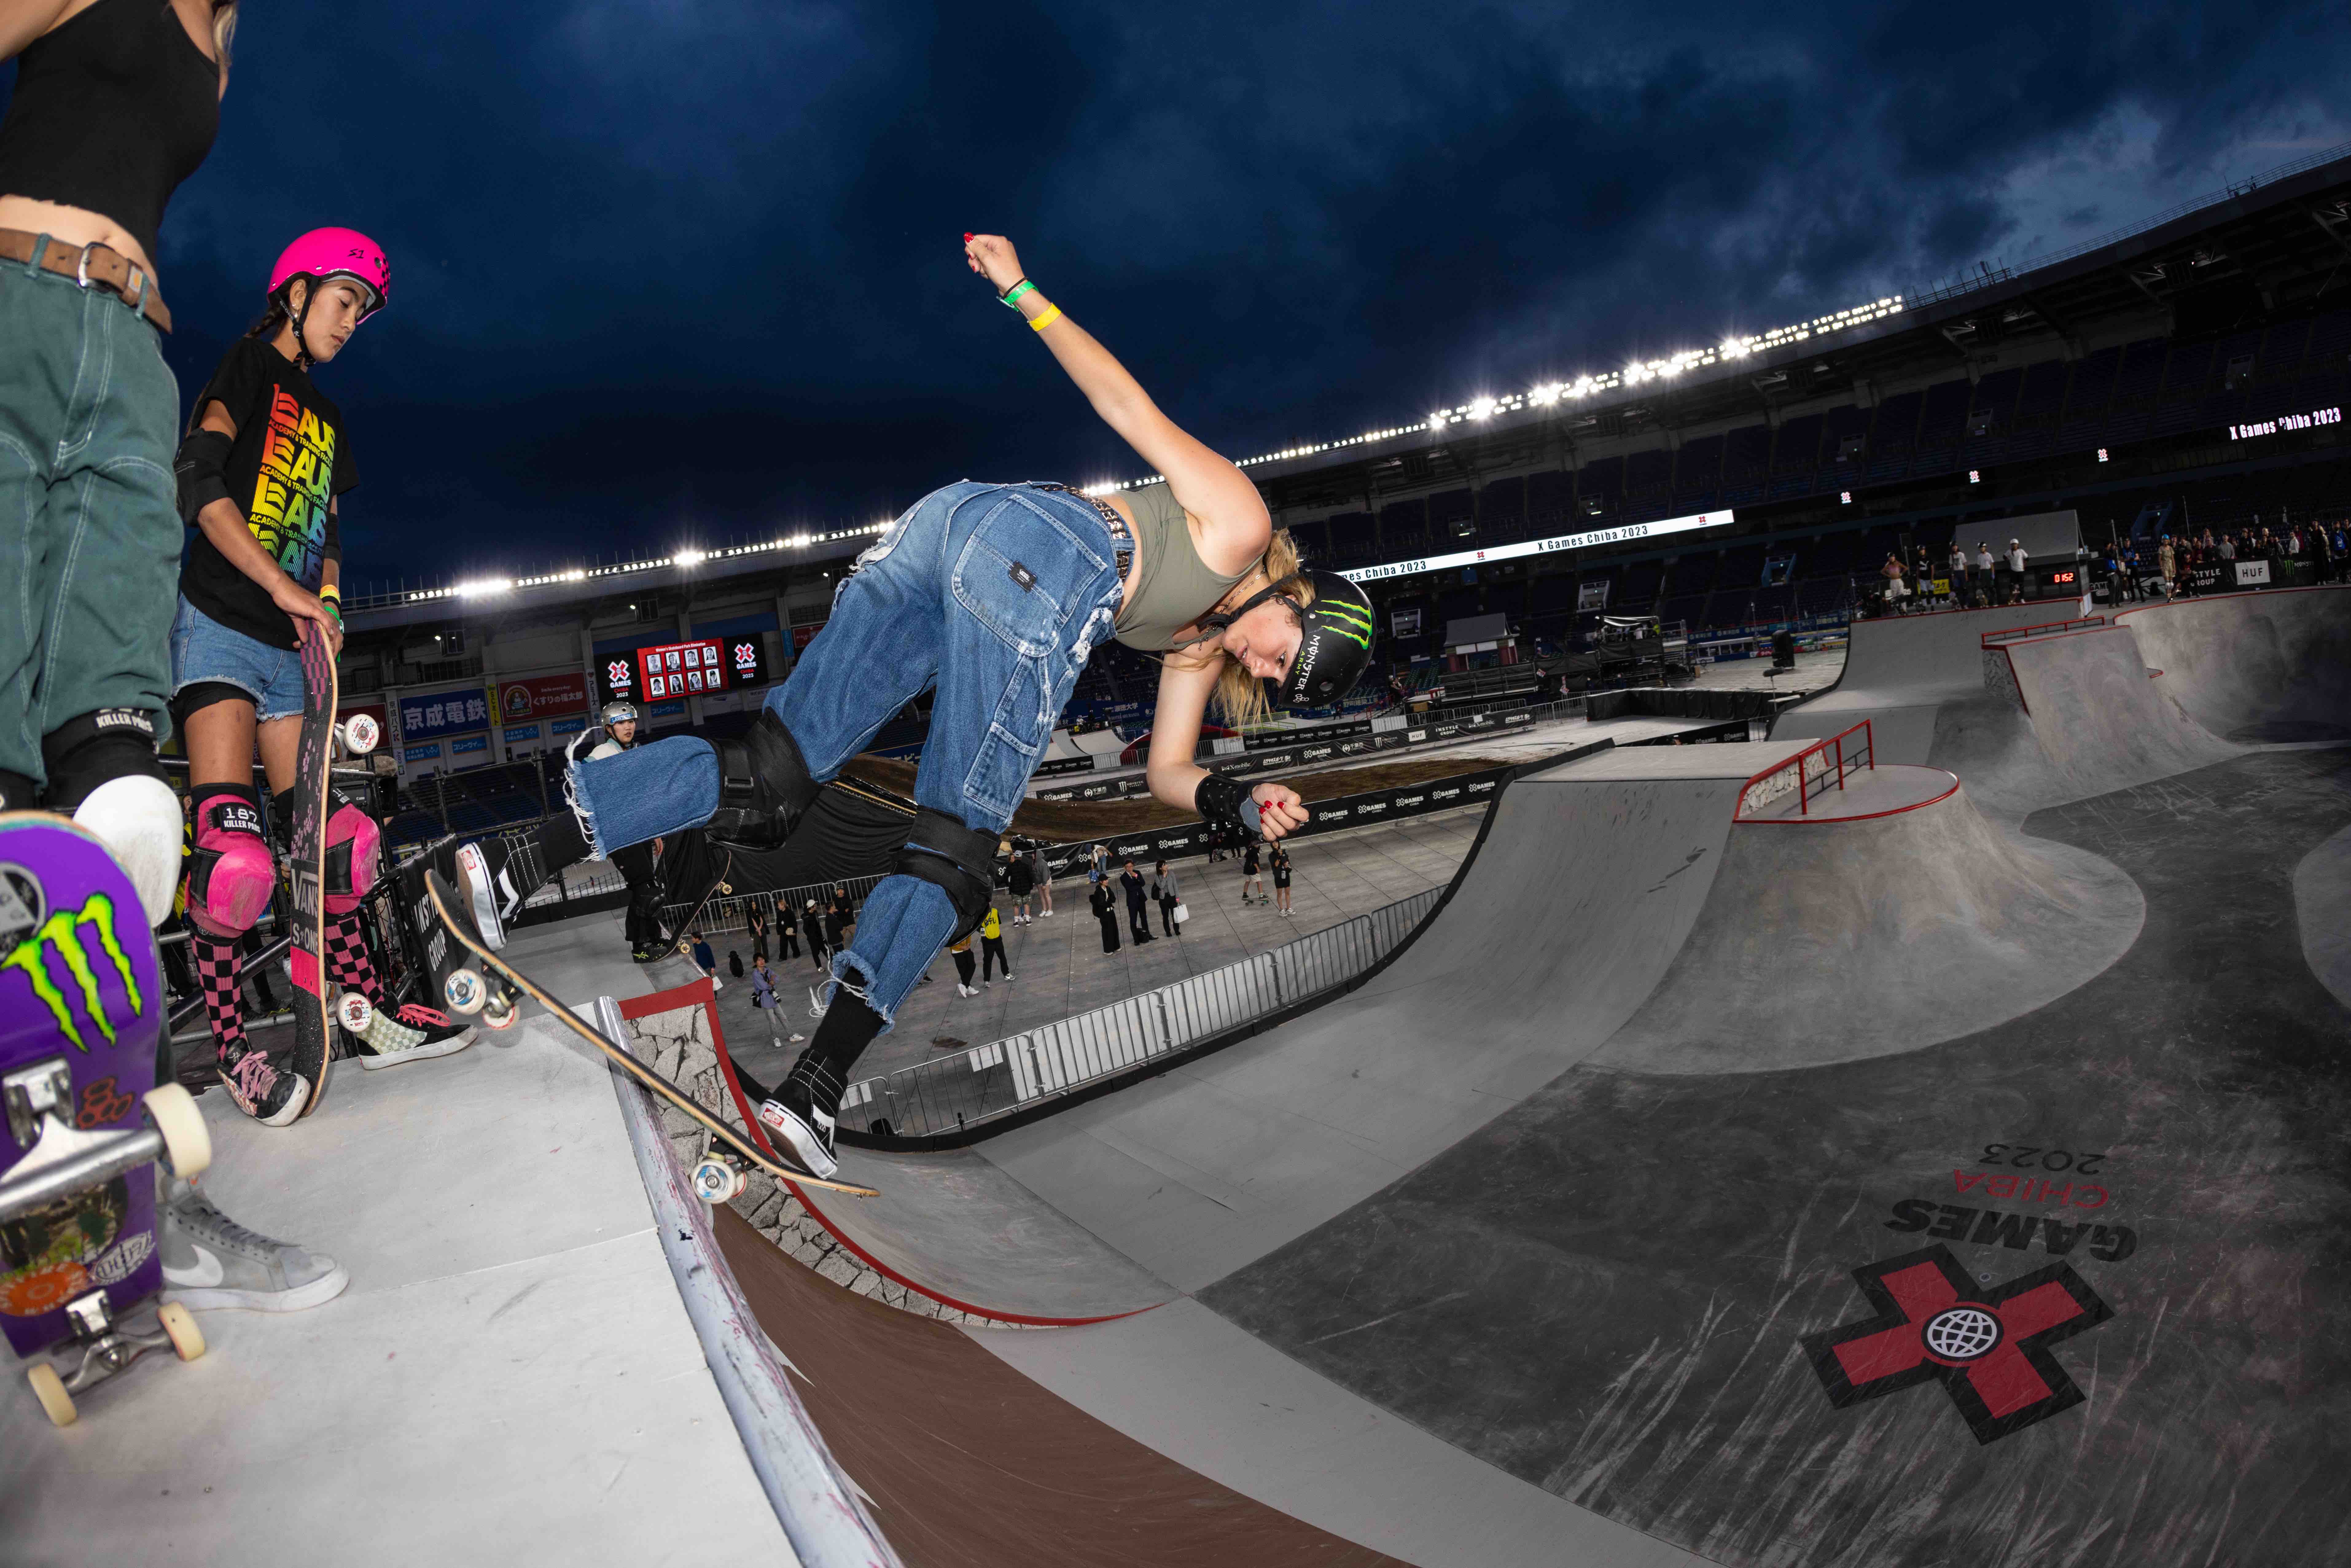 Monster Army's Ruby Lilley Takes Silver in Women's Skateboard Park at X Games Chiba 2023